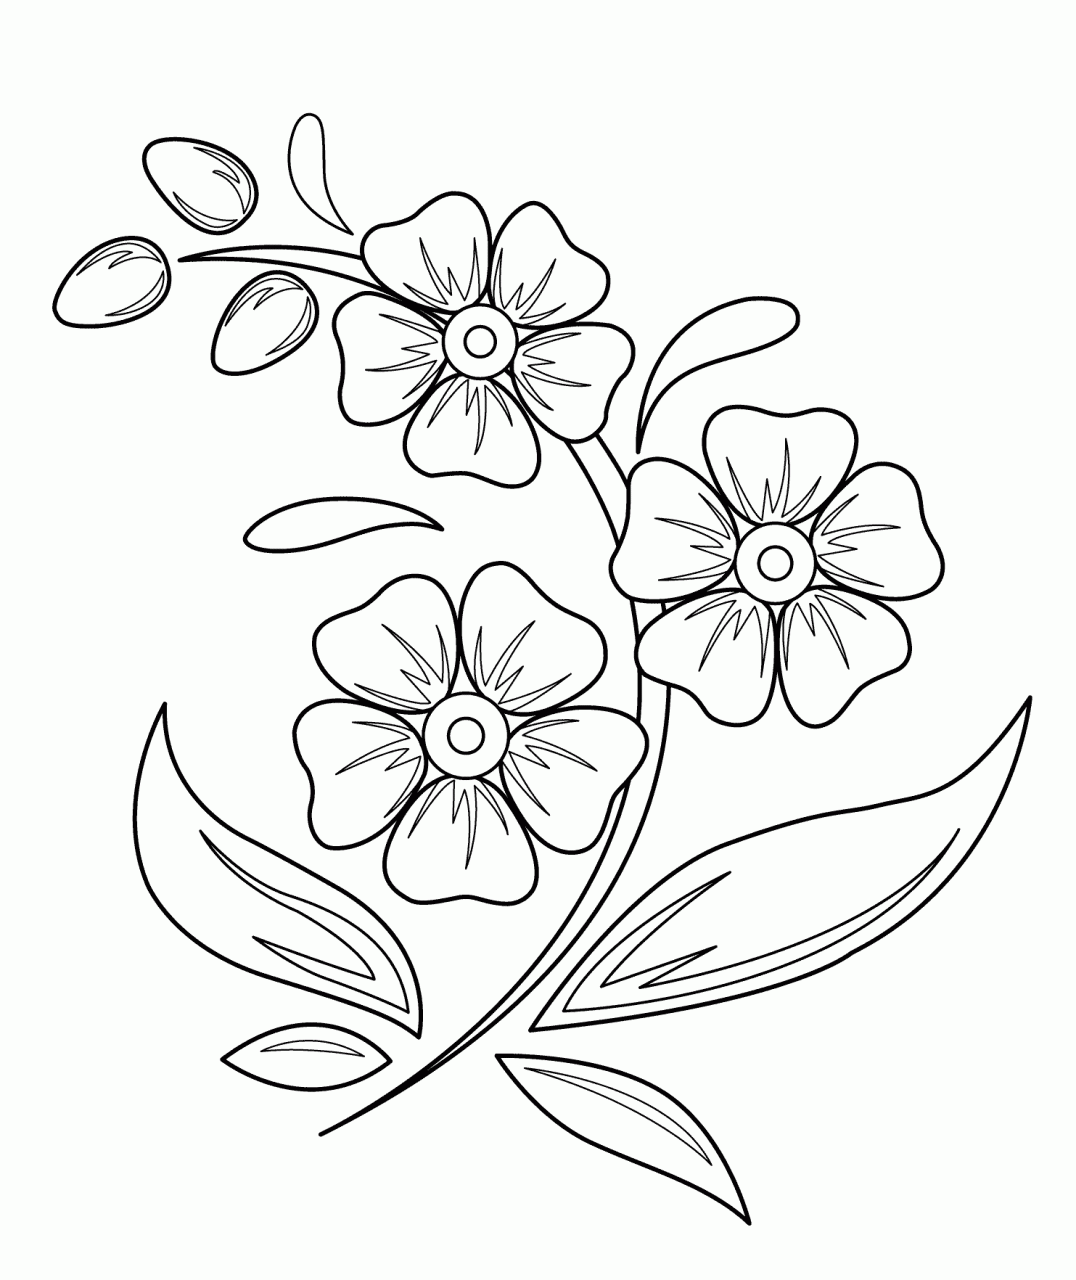 Free Flowers Drawing For Kids, Download Free Flowers Drawing For Kids